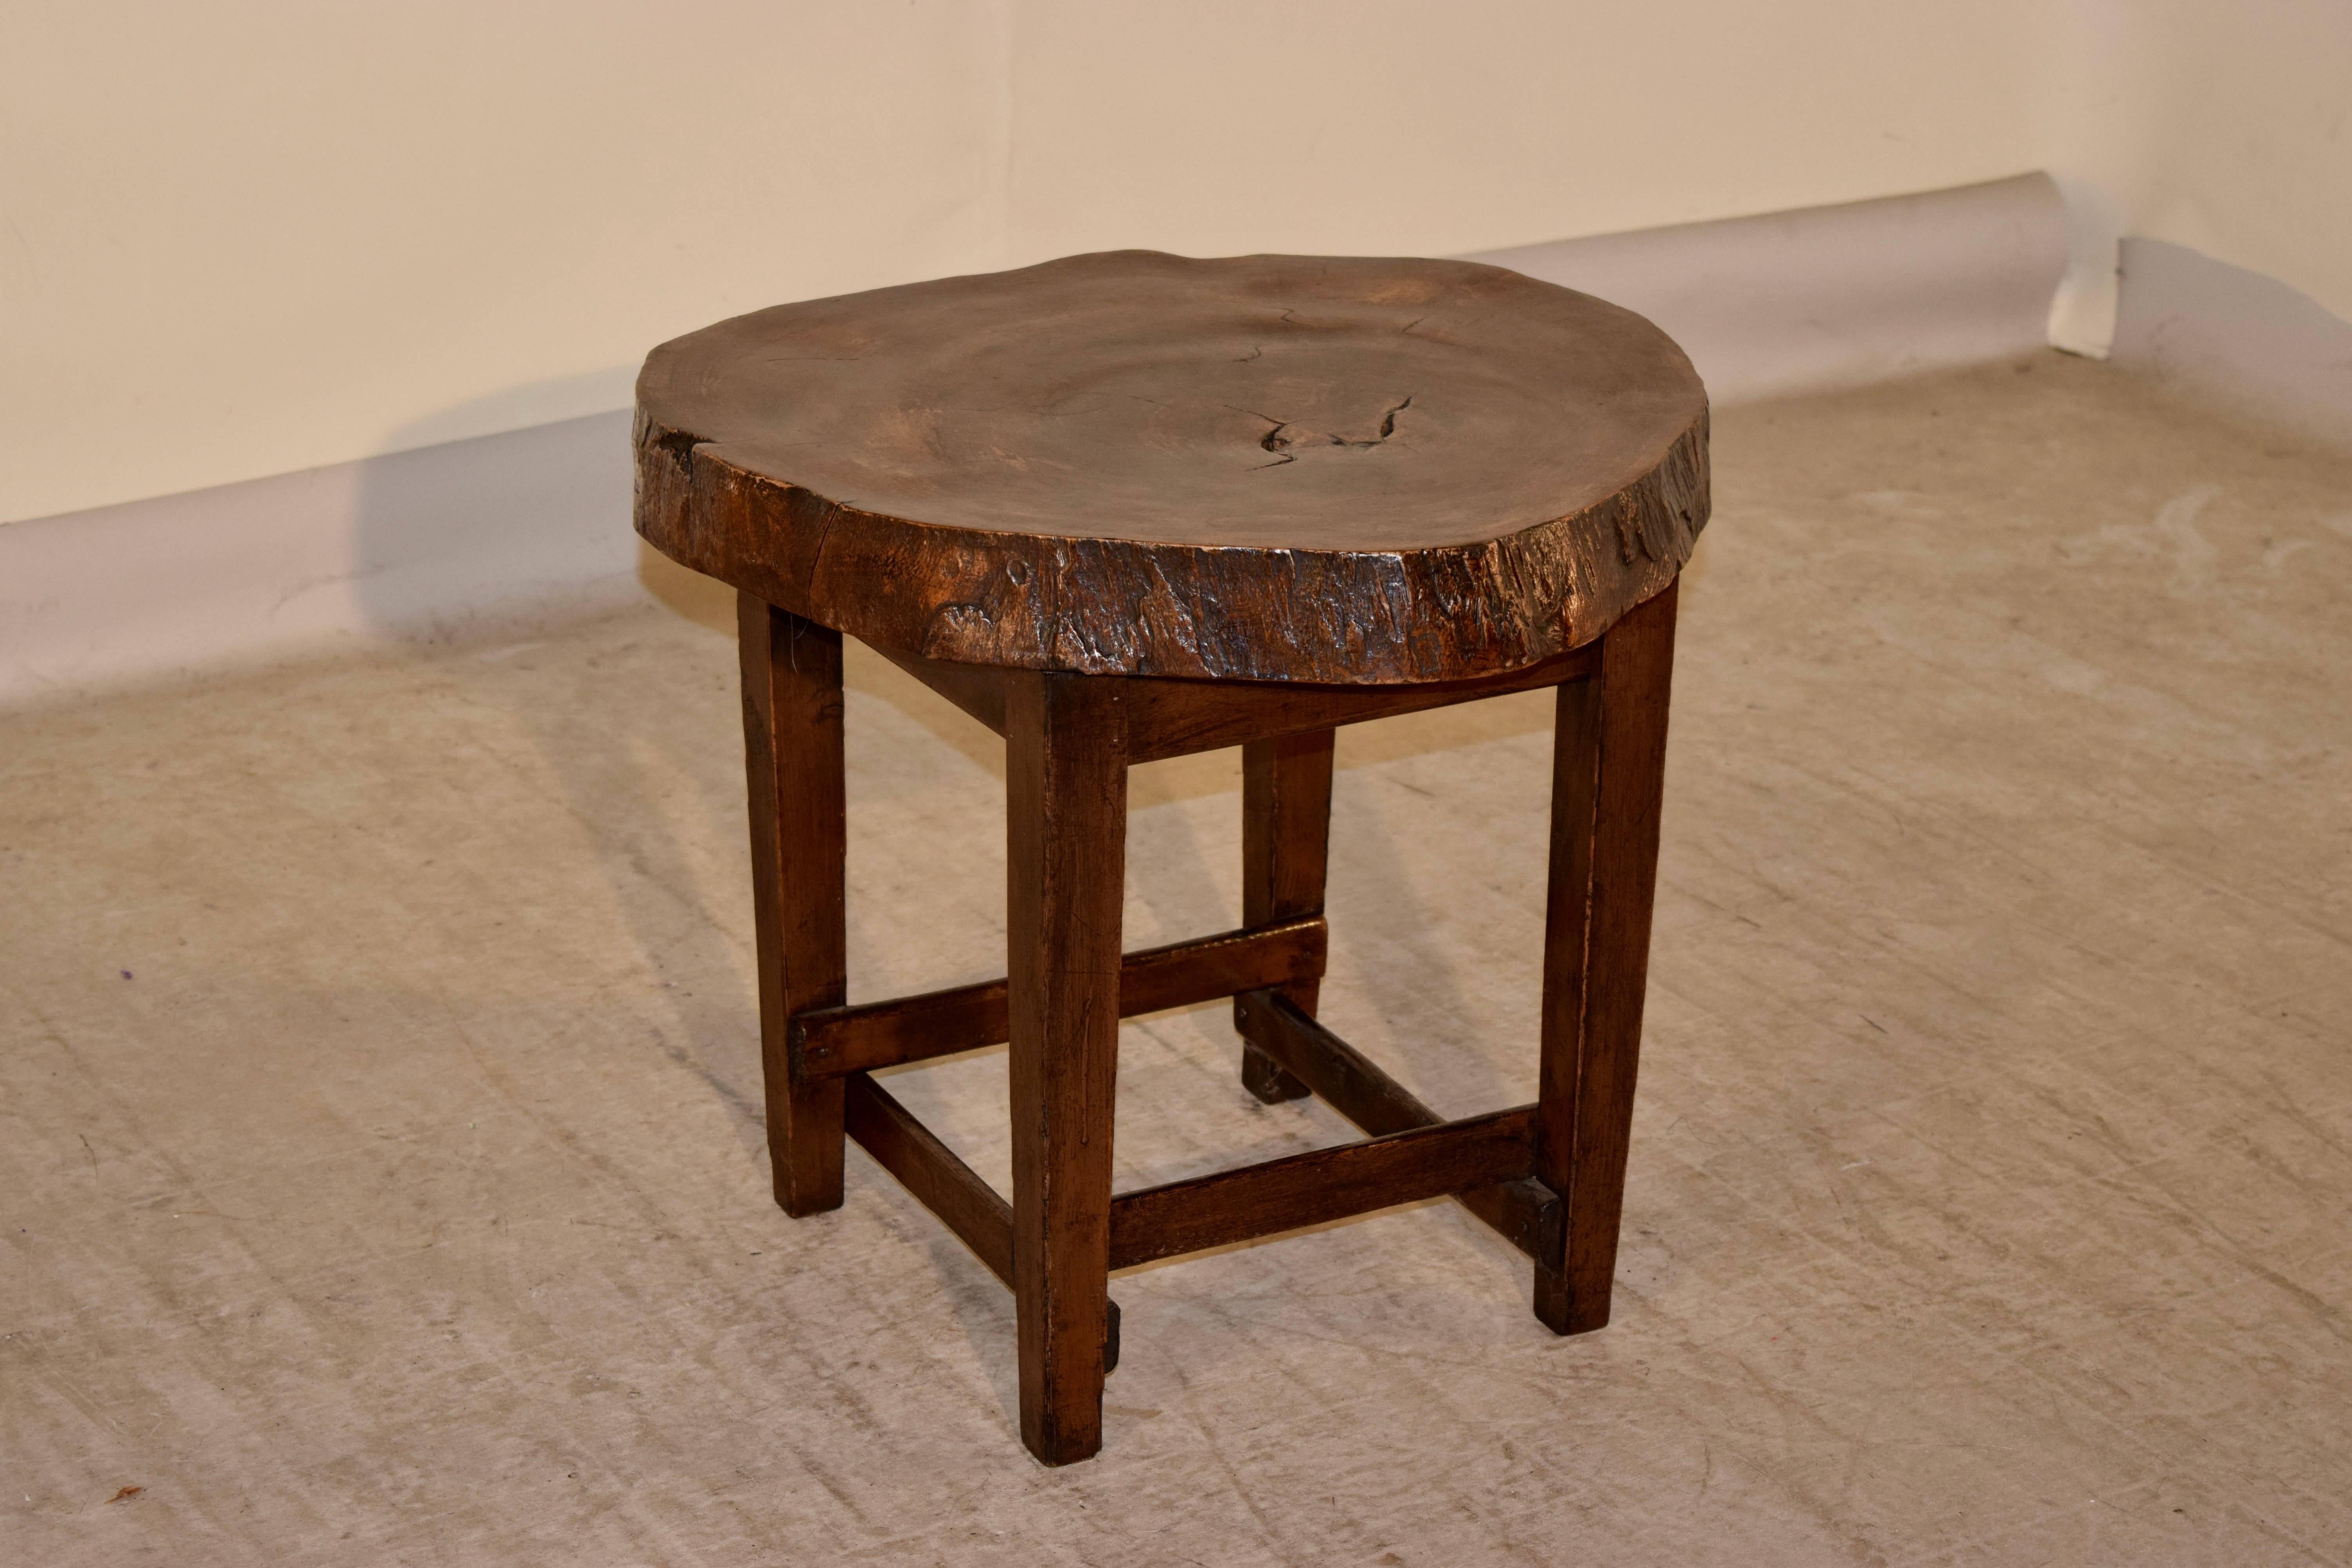 1950s walnut live edge side table from England. The top is a 3 inch thick slice from a walnut tree, supported on simple legs, joined by cross stretchers for stability.